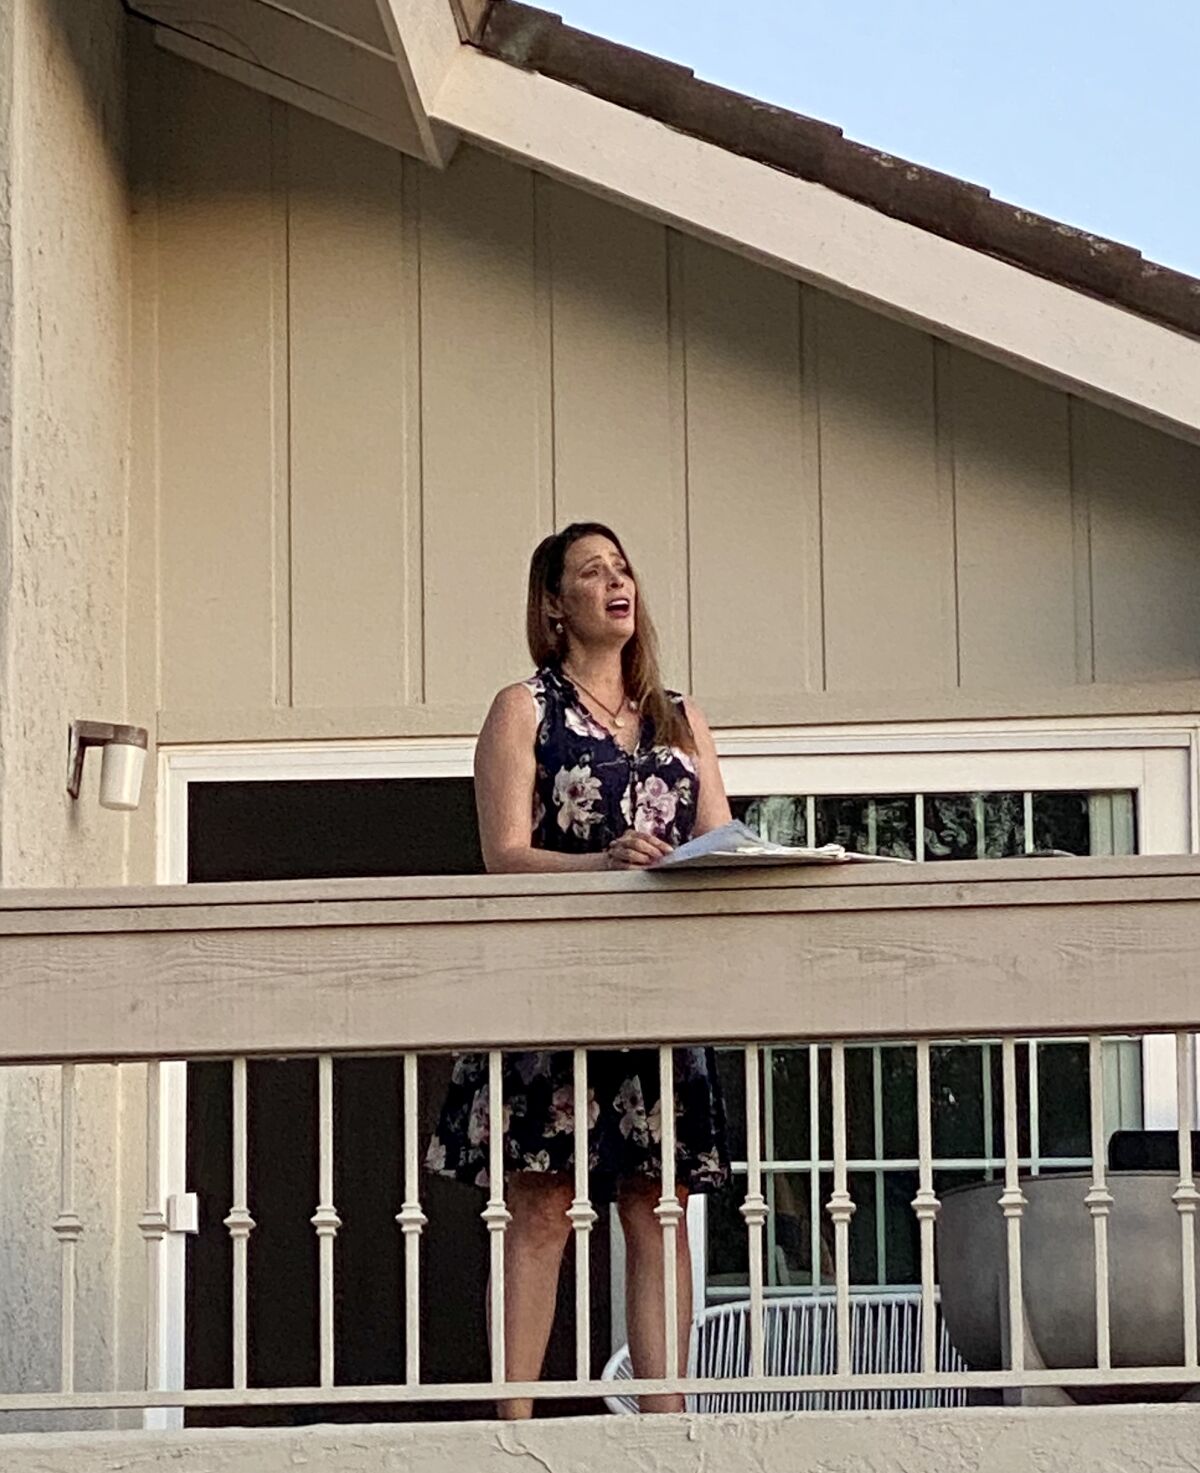 Professional opera singer Alina Mullen performs for her neighbors from her balcony in La Jolla on May 8.